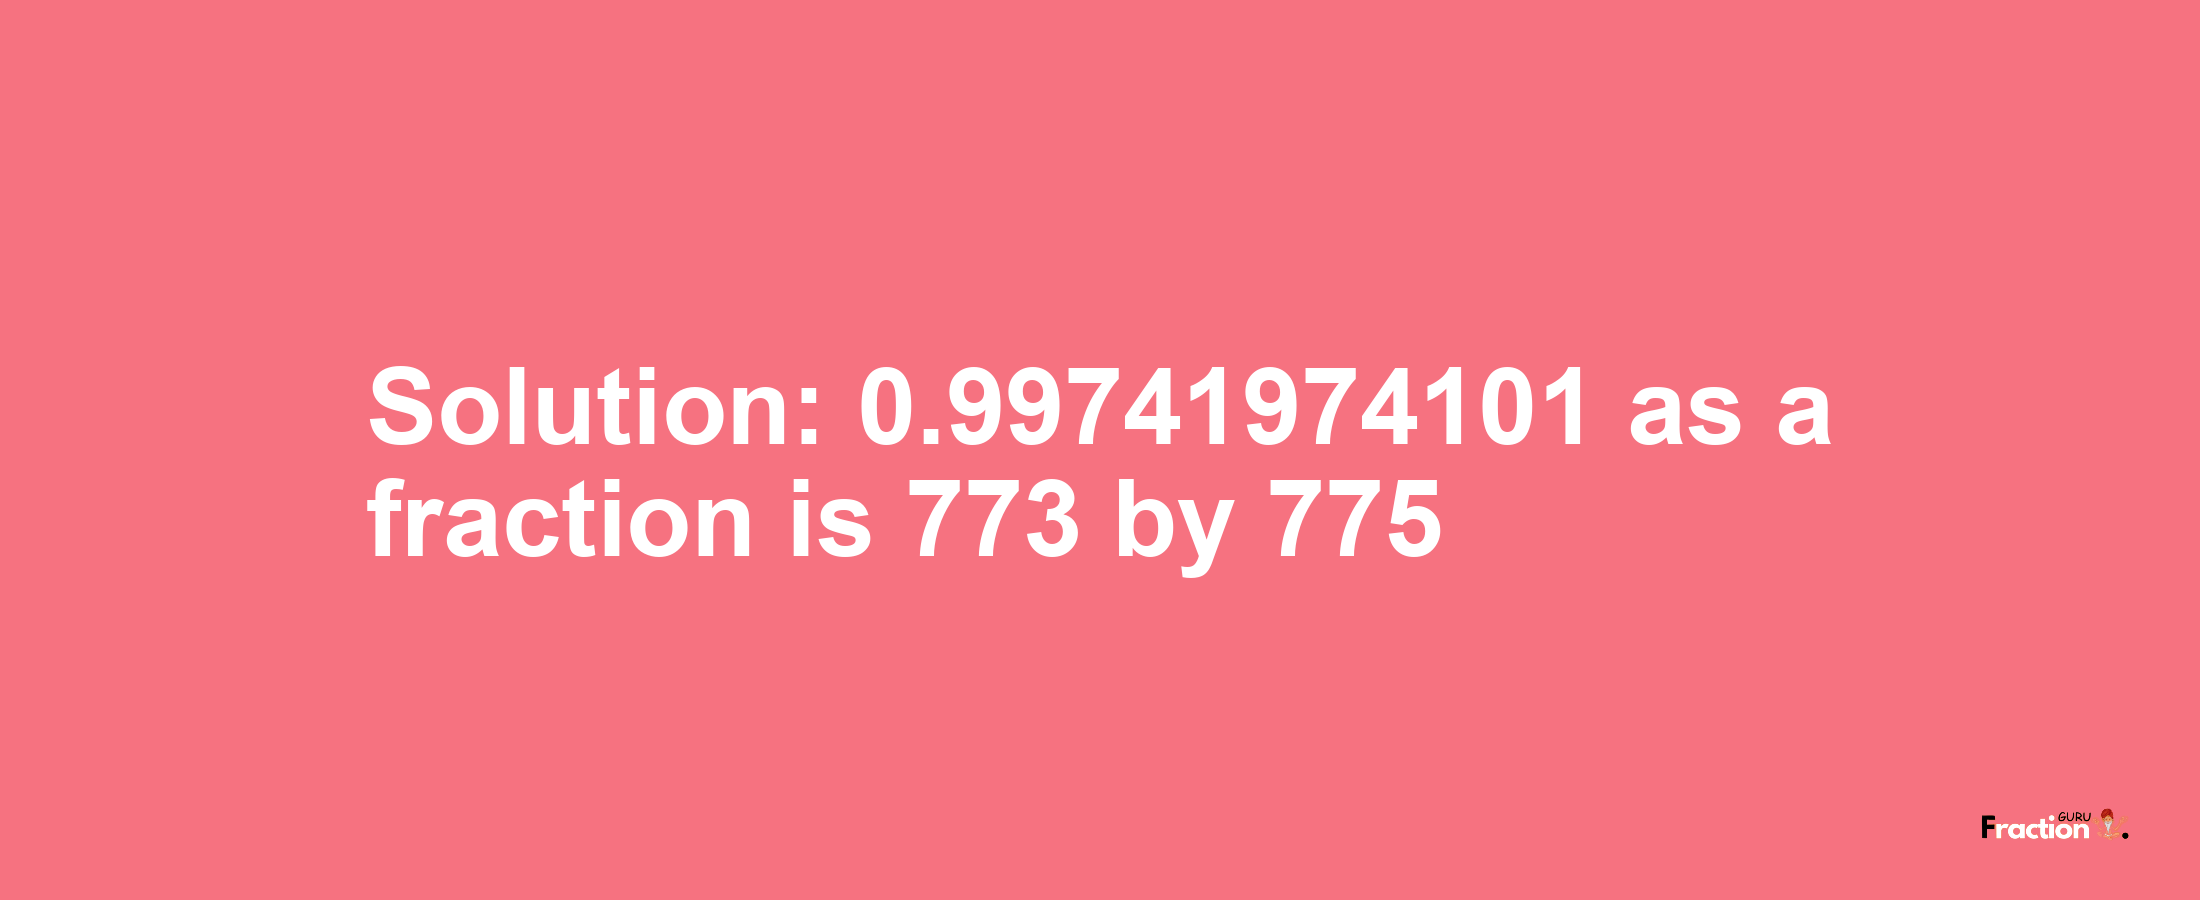 Solution:0.99741974101 as a fraction is 773/775